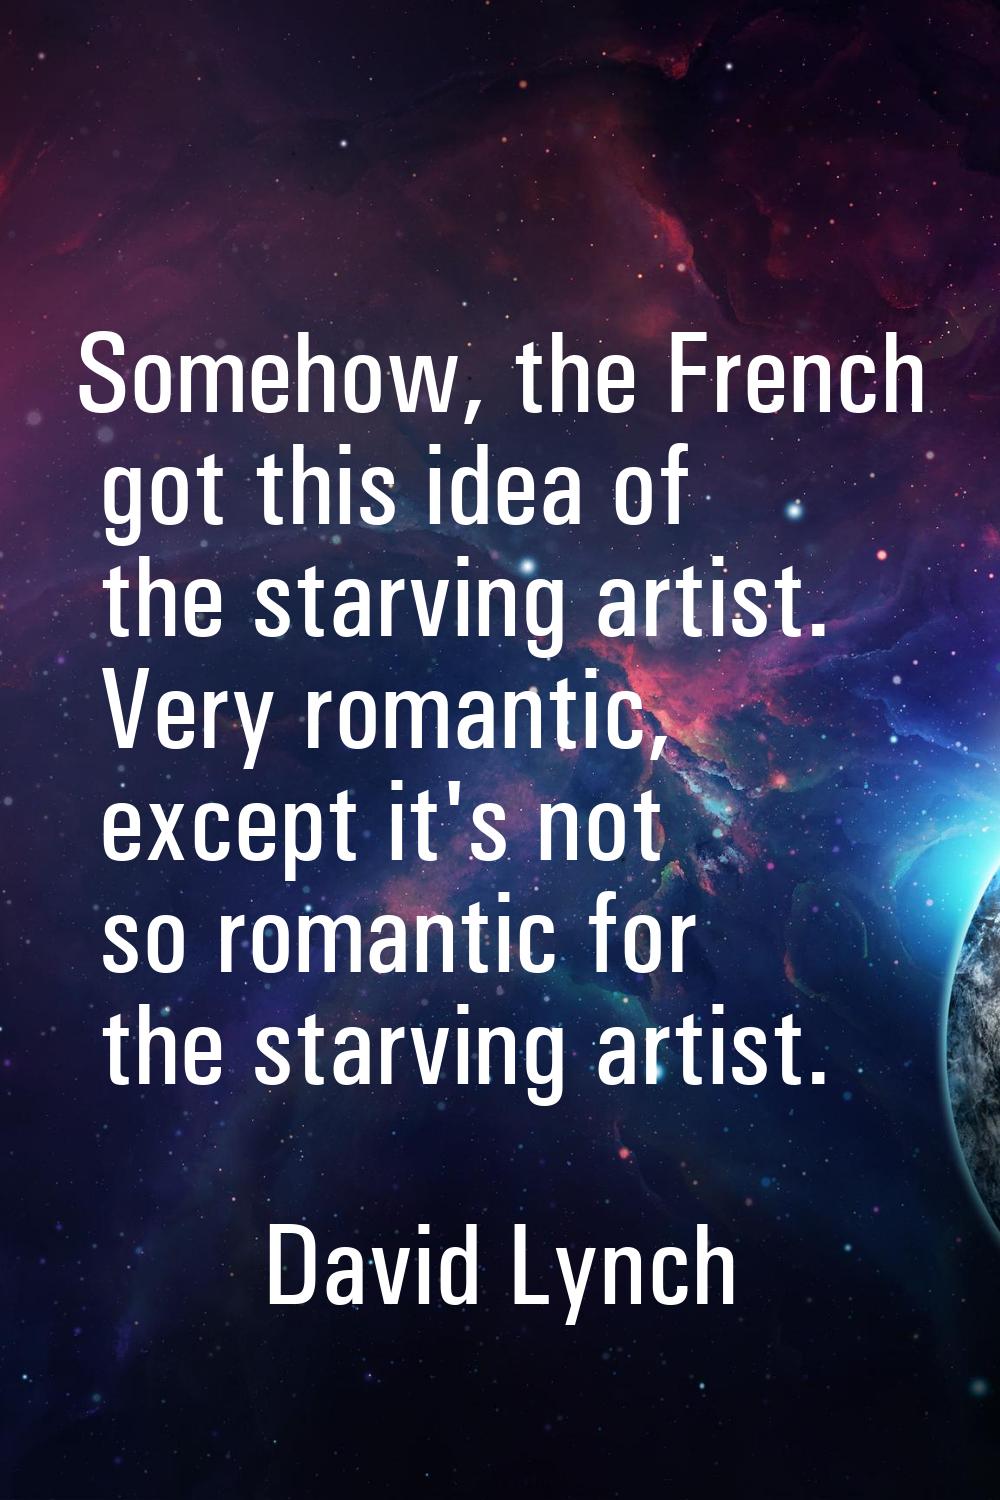 Somehow, the French got this idea of the starving artist. Very romantic, except it's not so romanti